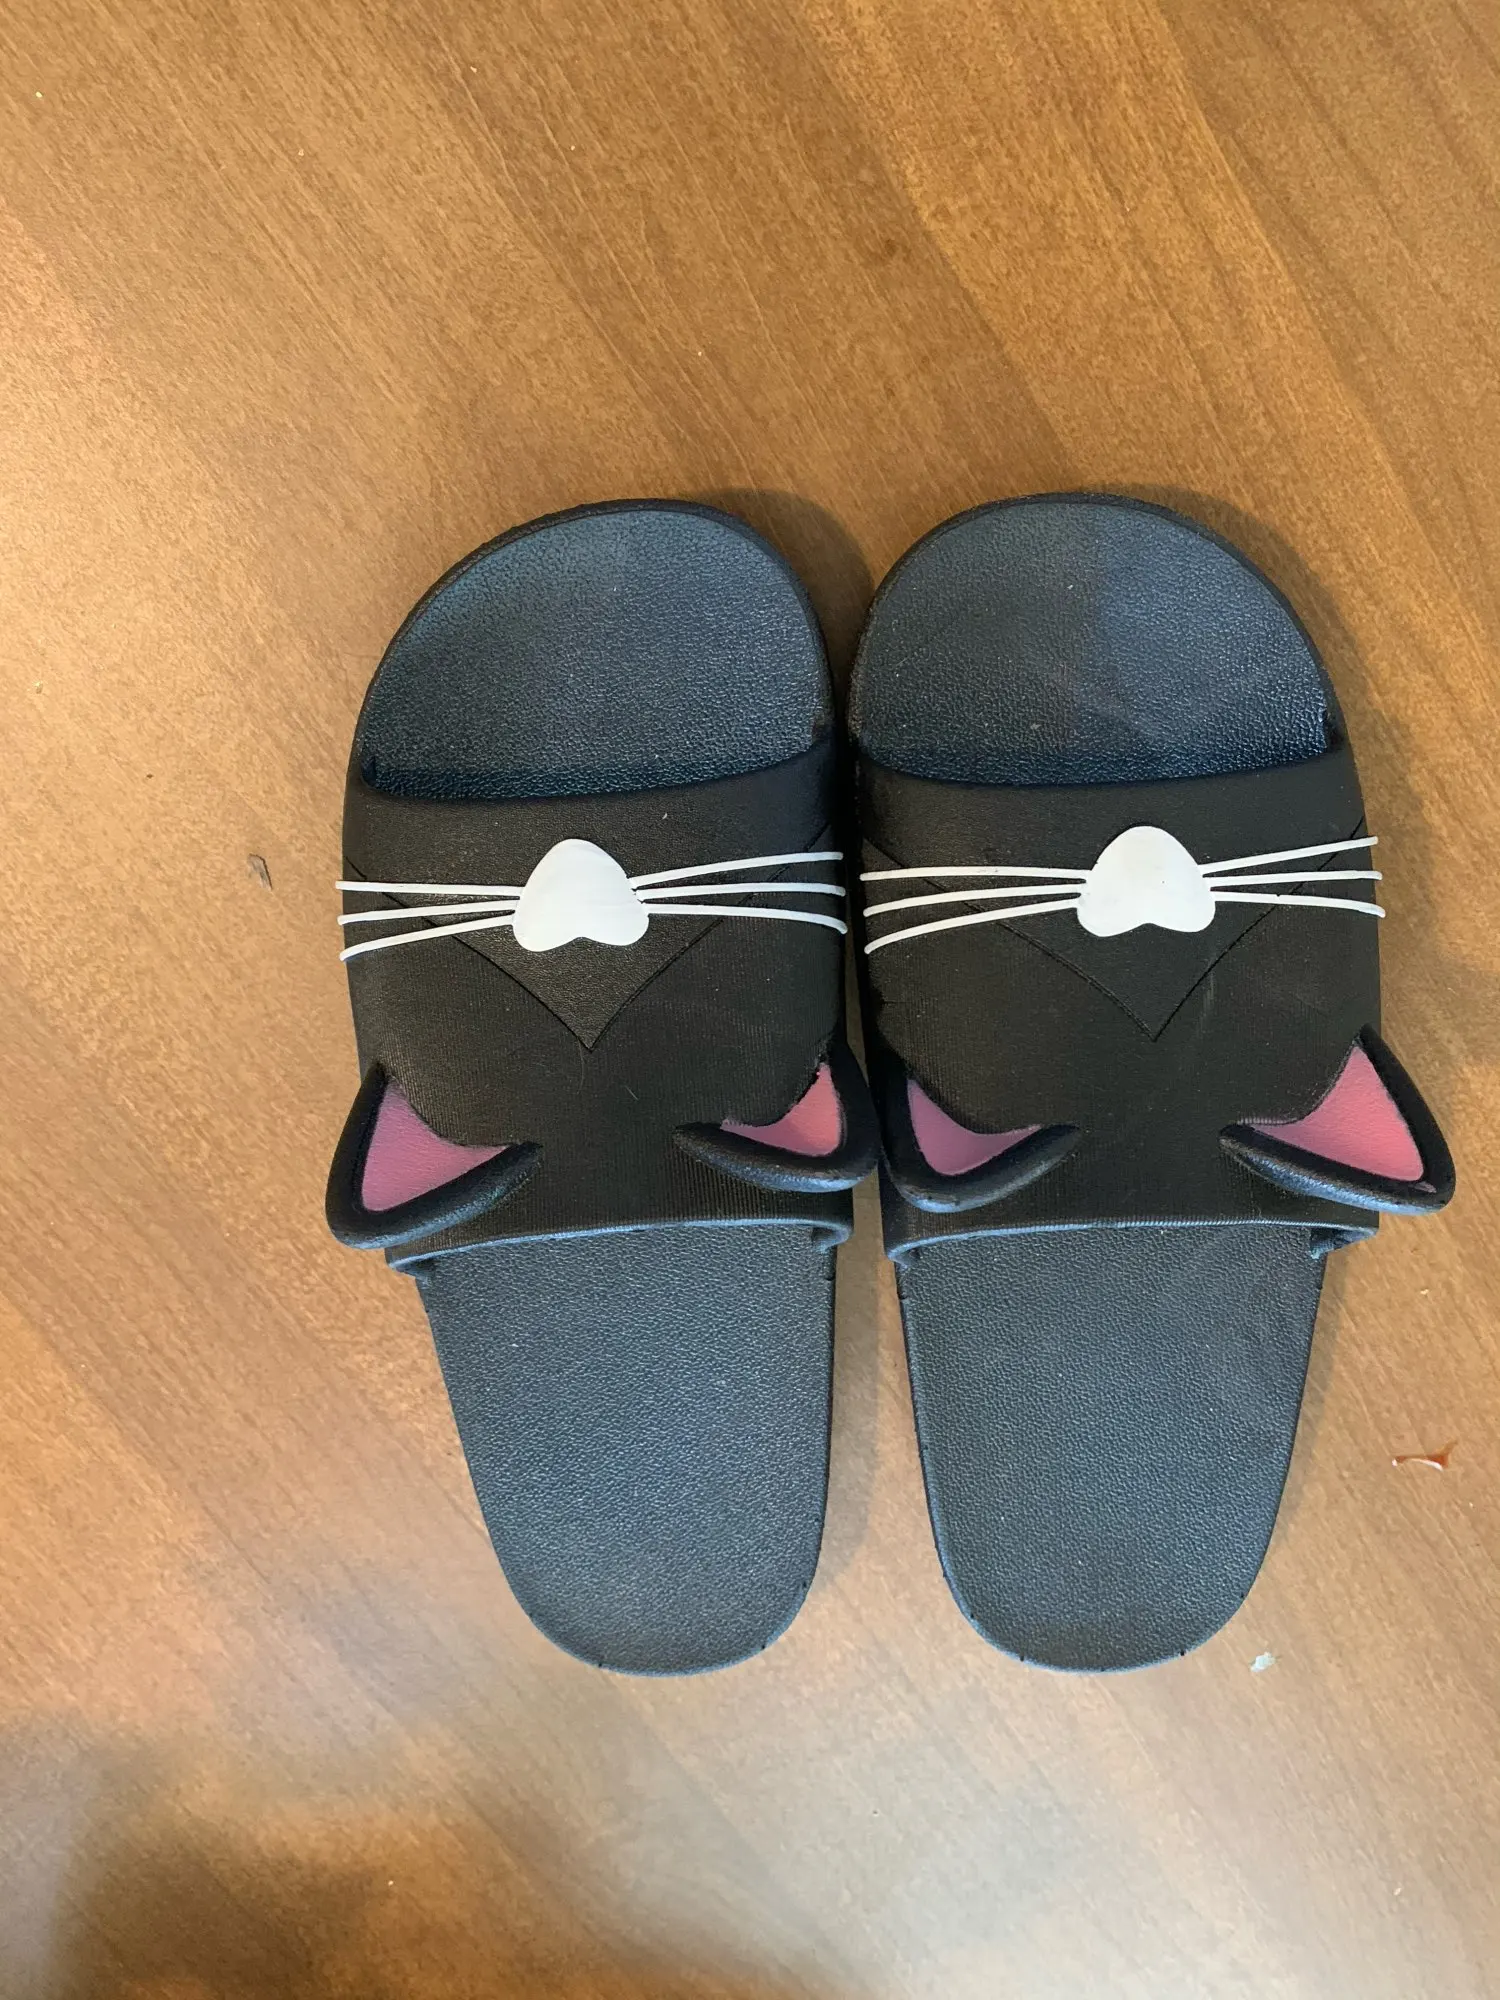 Rock a pair of cute feline-inspired casual slippers and slip on these Women Slippers Cute Cartoon Cat. lolithecat.com